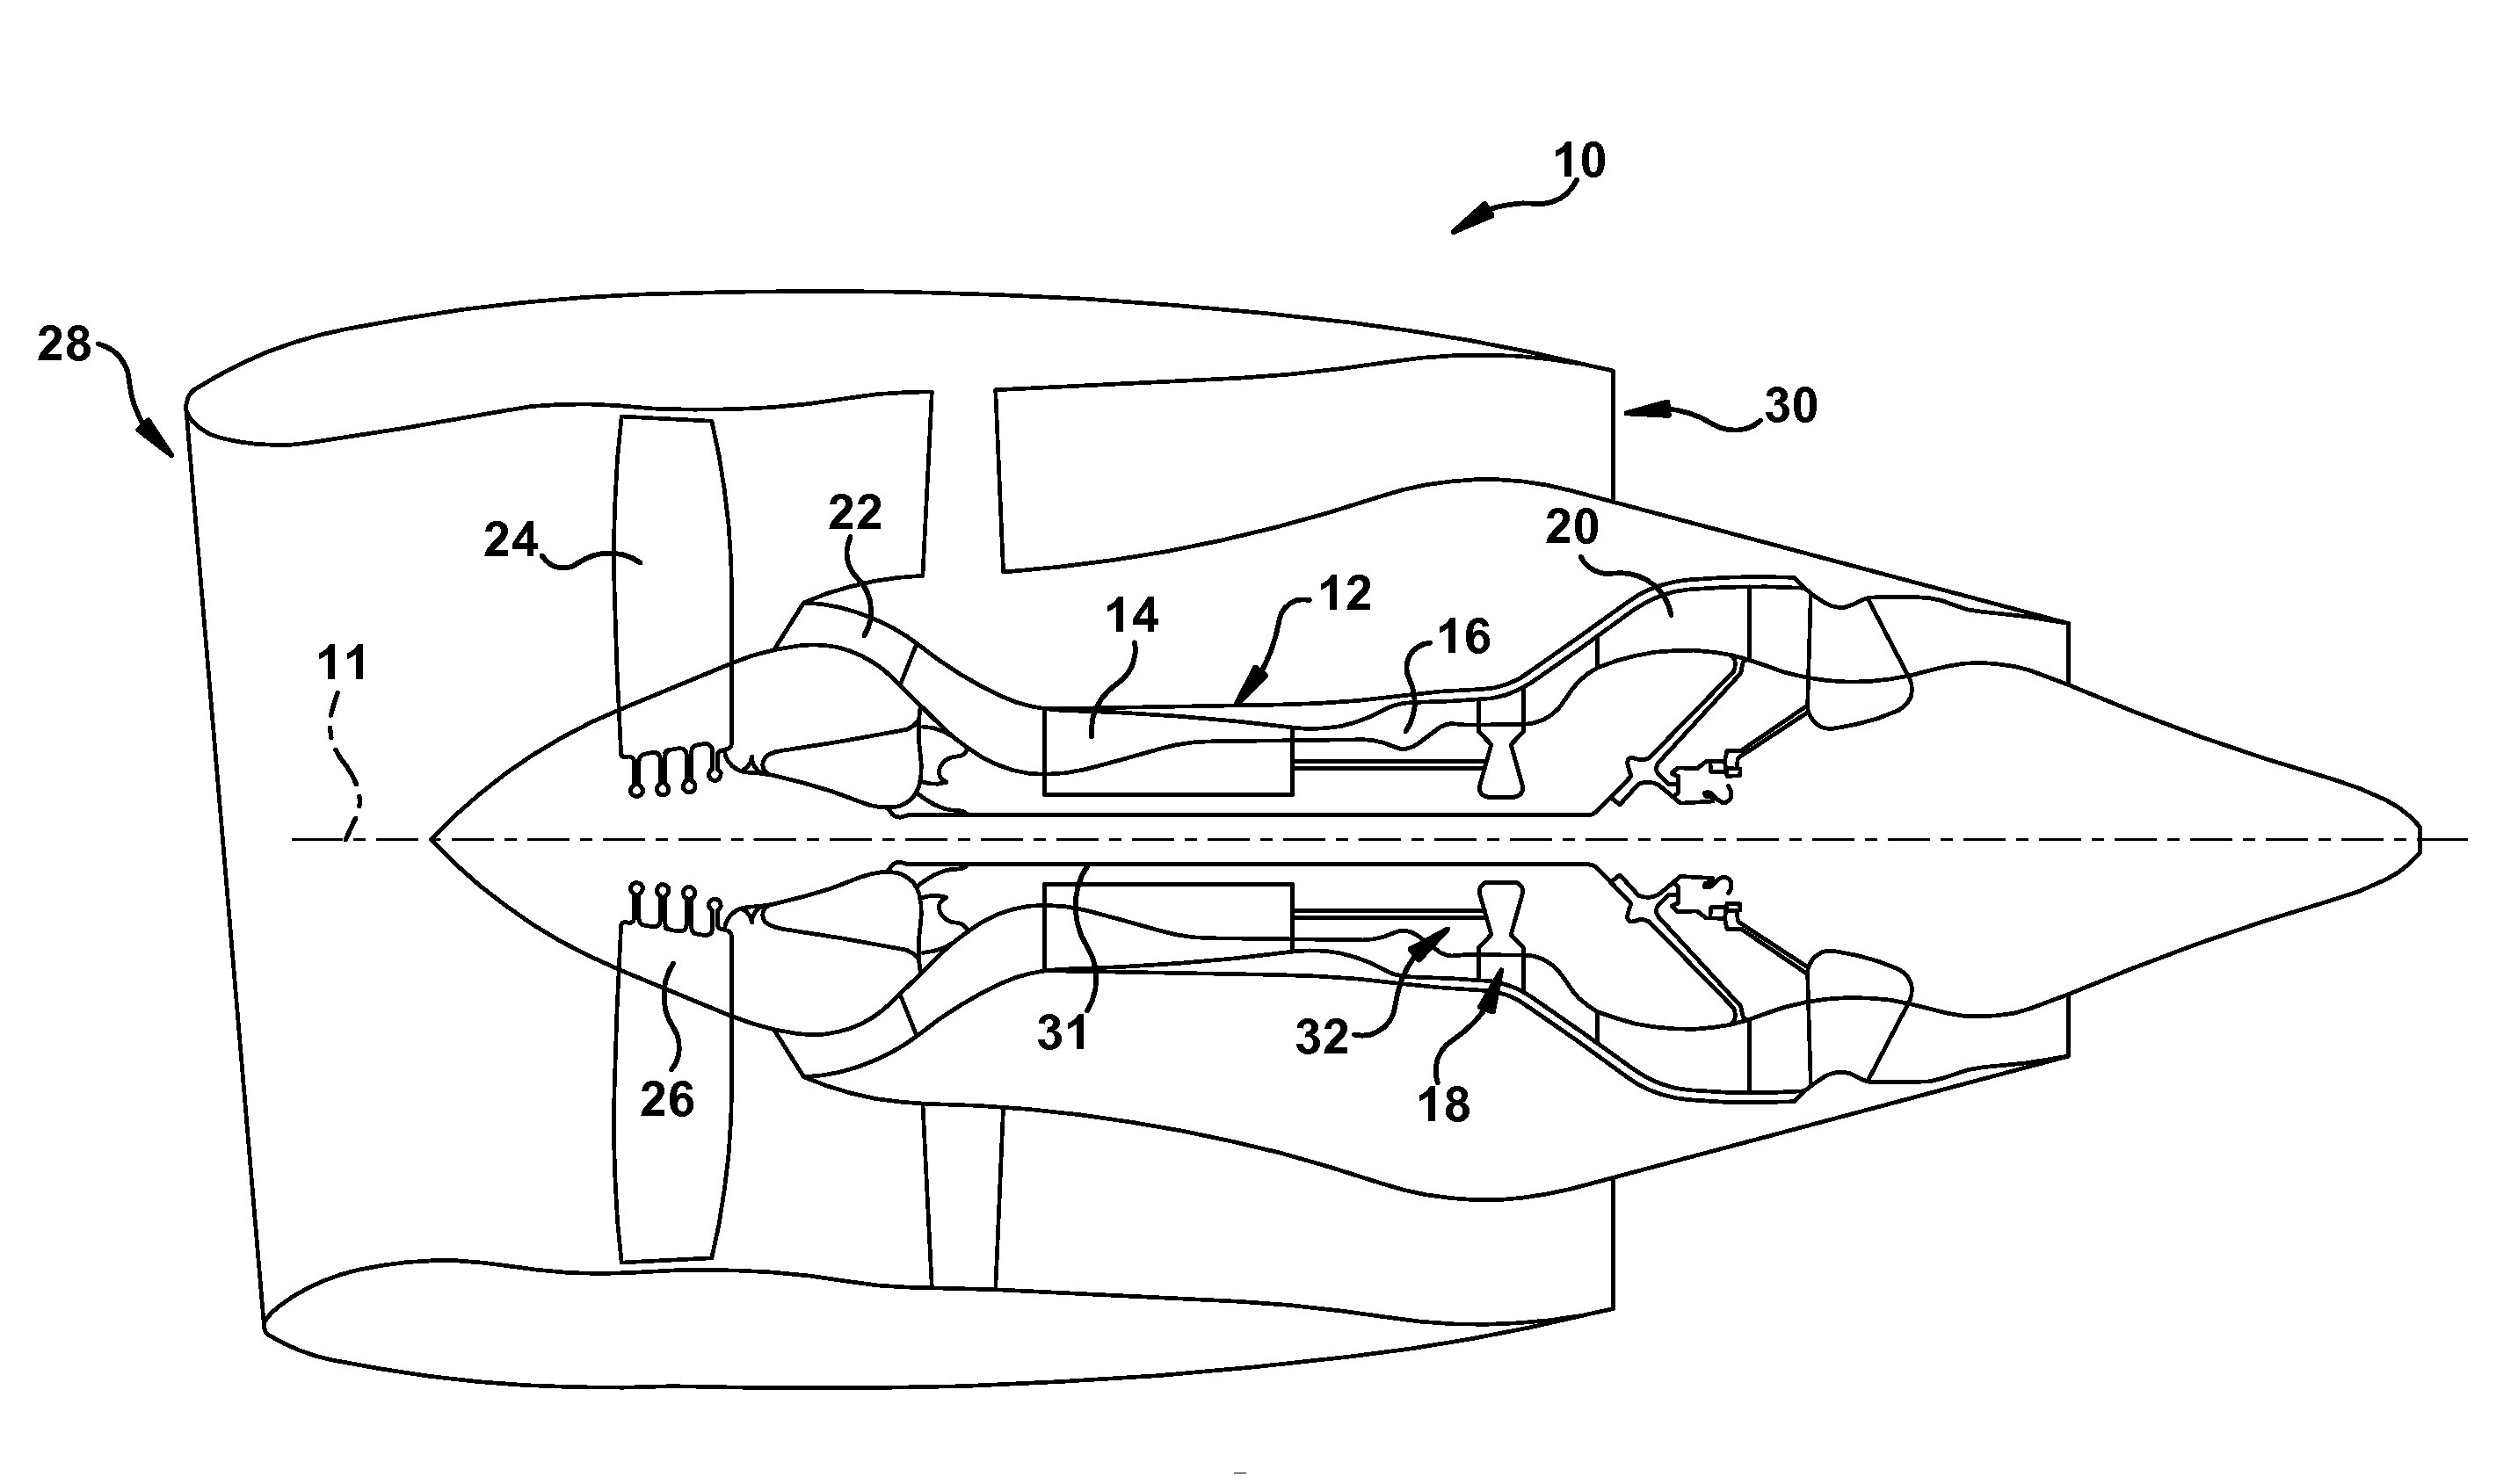 Methods and systems for mitigating distortion of gas turbine shaft